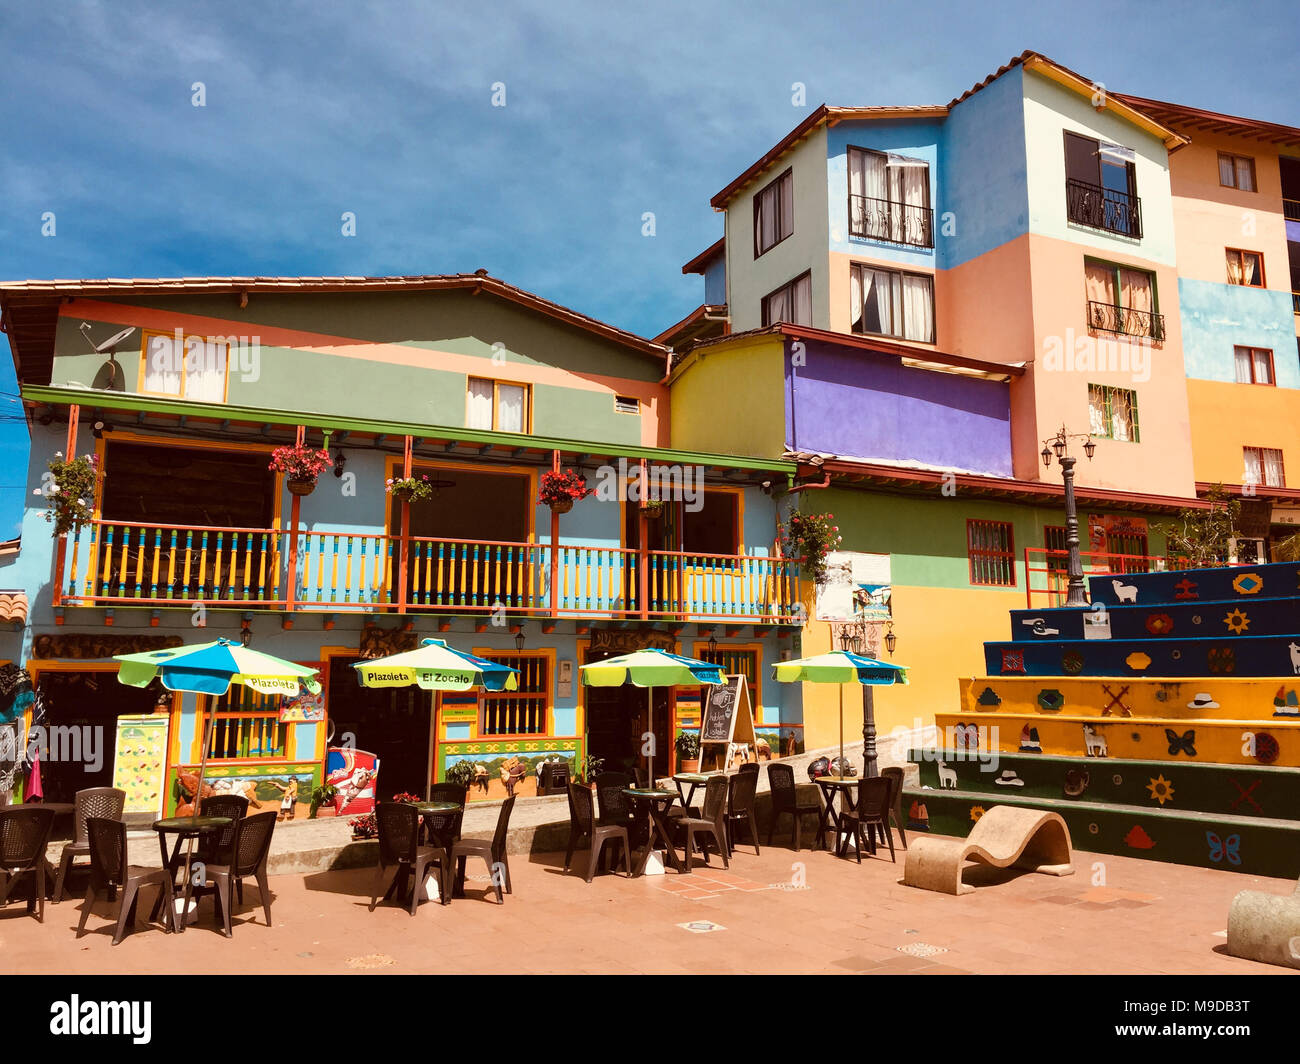 Guatape, Colombia - february 2018: Colorful streets and ornate houses of the city of Guatape near Medellin, Antioquia, Colombia Stock Photo